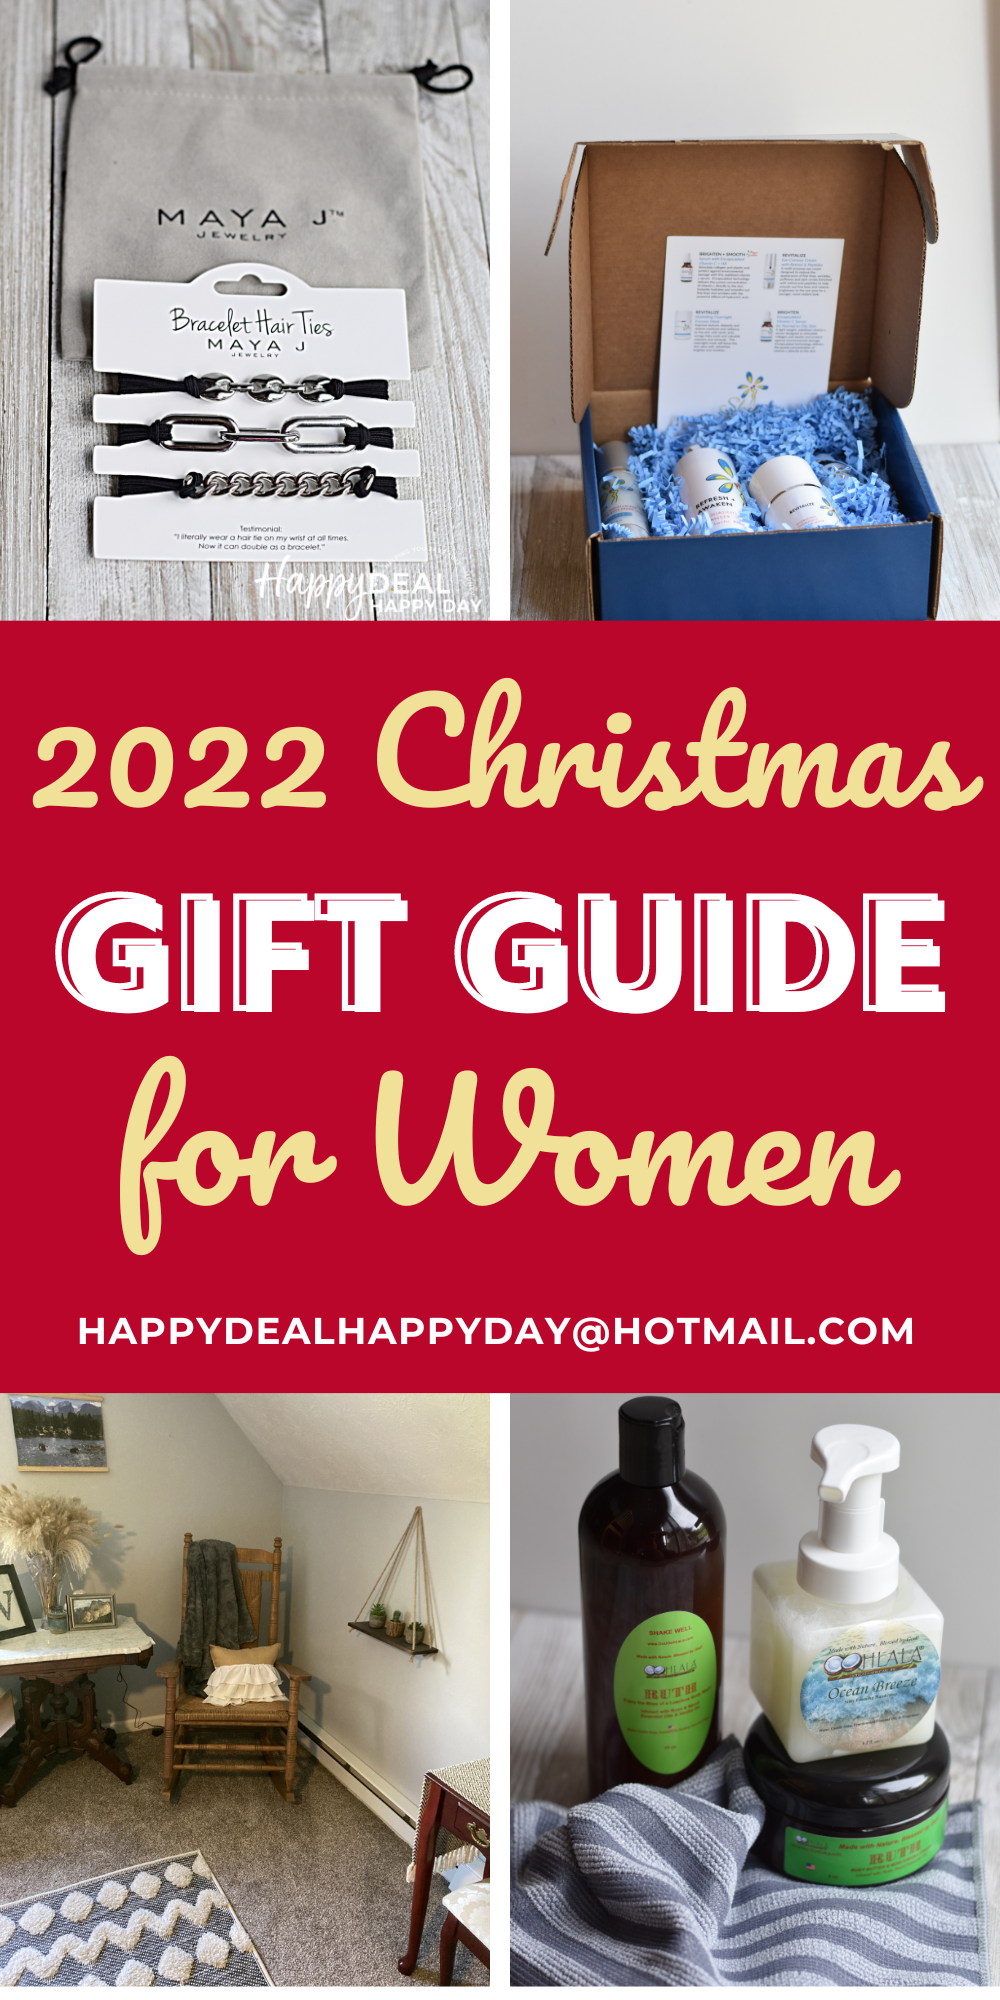 Christmas gifts for women